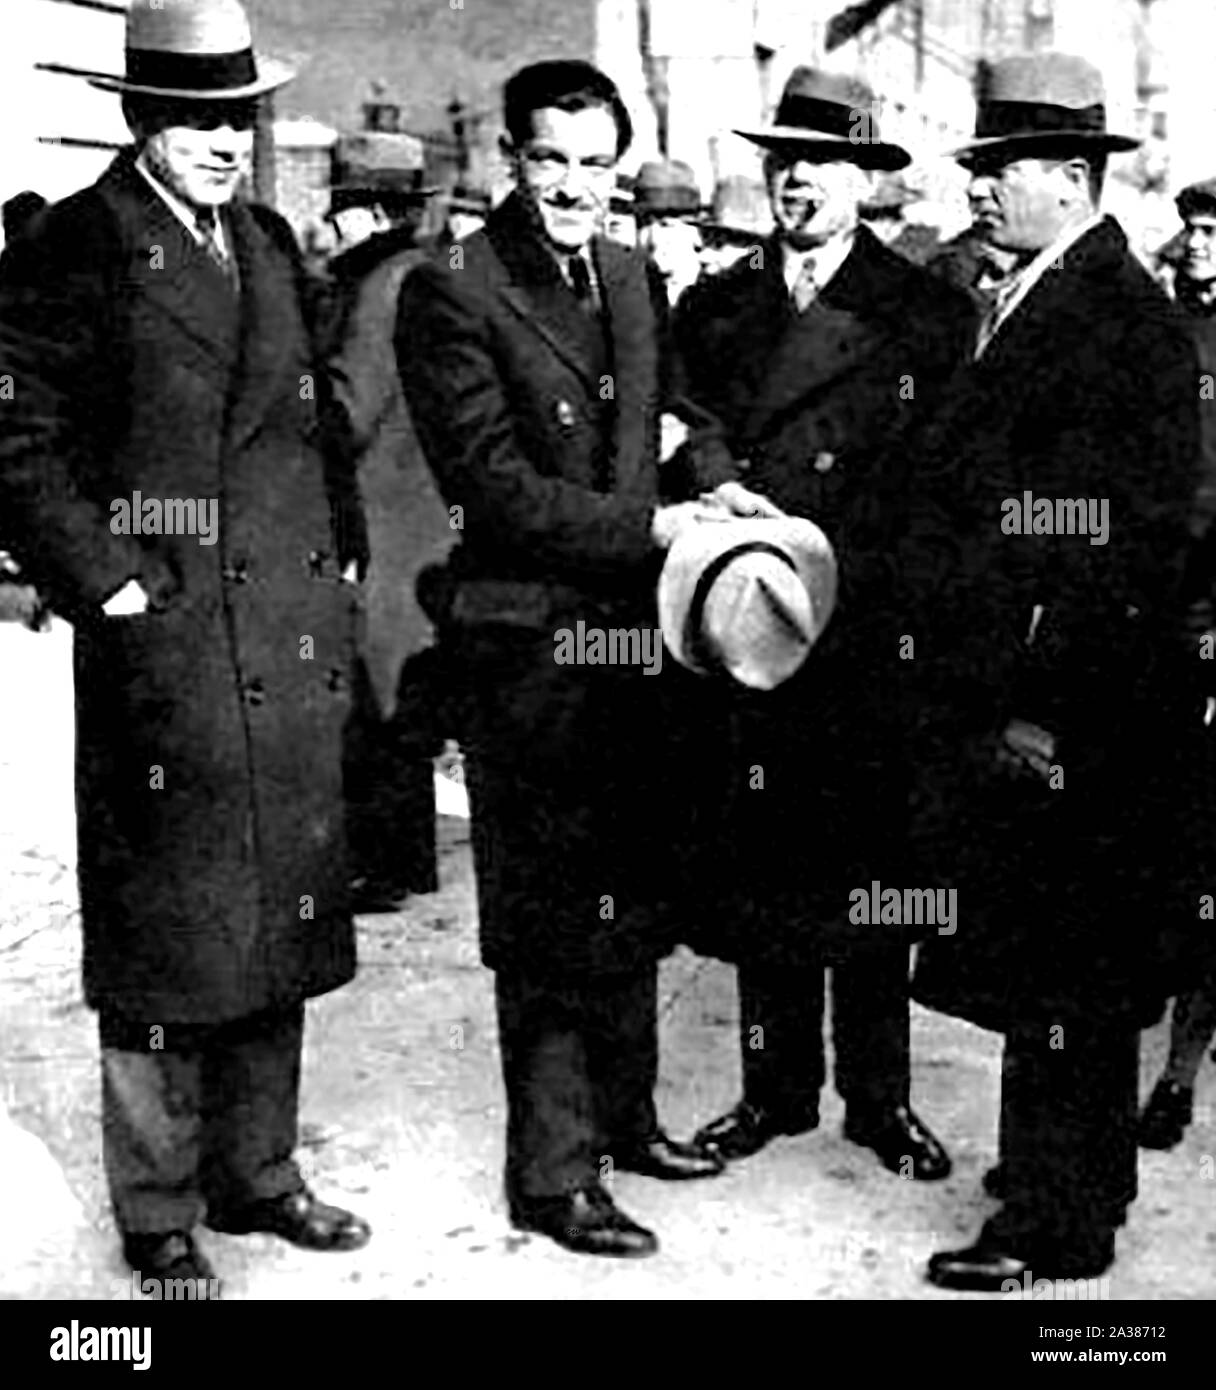 1930 periodical illustration - Law & Order in the USA -  A full length portrait of the always dapper 'The Jersey Kid' (2nd from left) soon after his capture Stock Photo